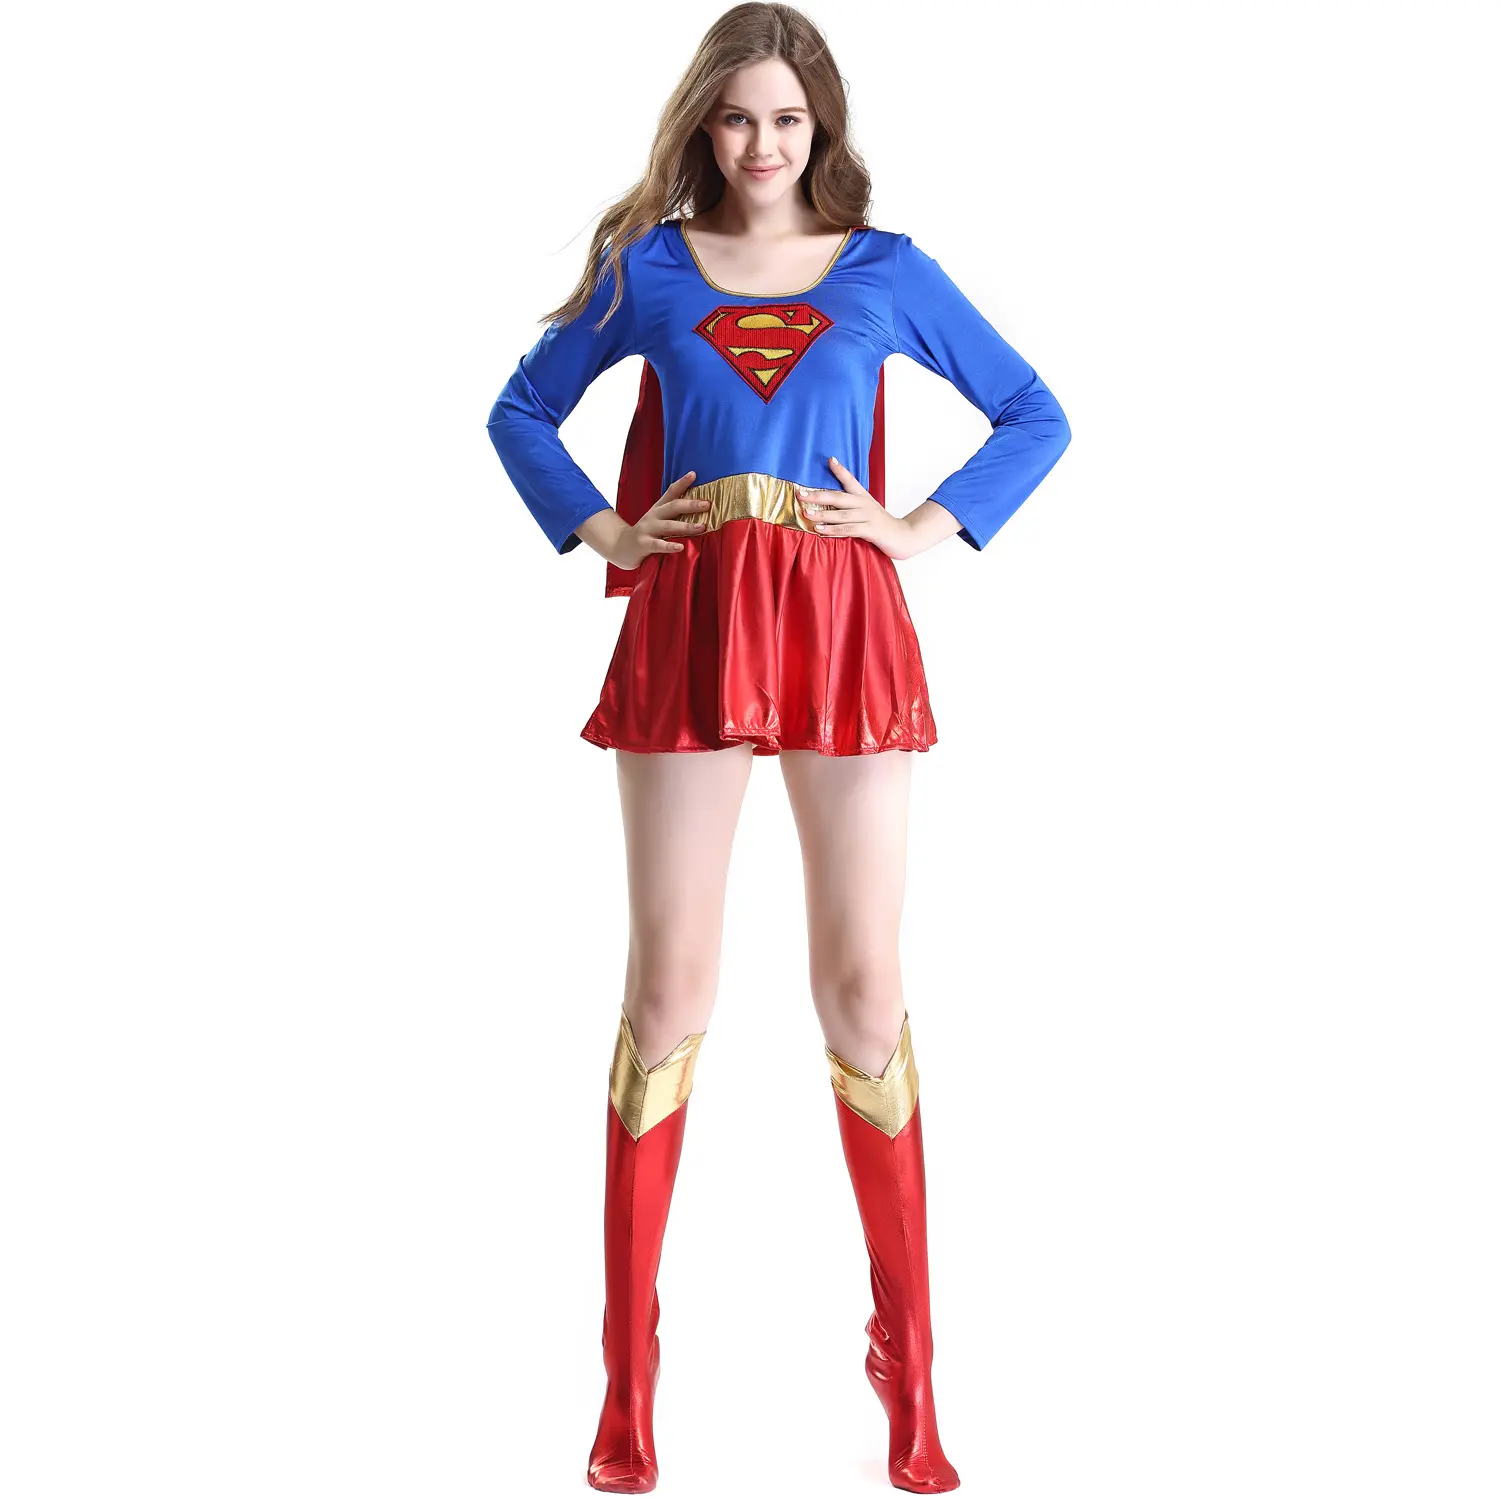 <span class=keywords><strong>Costume</strong></span> de Cosplay <span class=keywords><strong>Anime</strong></span> grande taille Halloween <span class=keywords><strong>Sexy</strong></span> Supergirl, ensemble de <span class=keywords><strong>Costume</strong></span> Cosplay en cuir PU, robes fantaisie pour filles